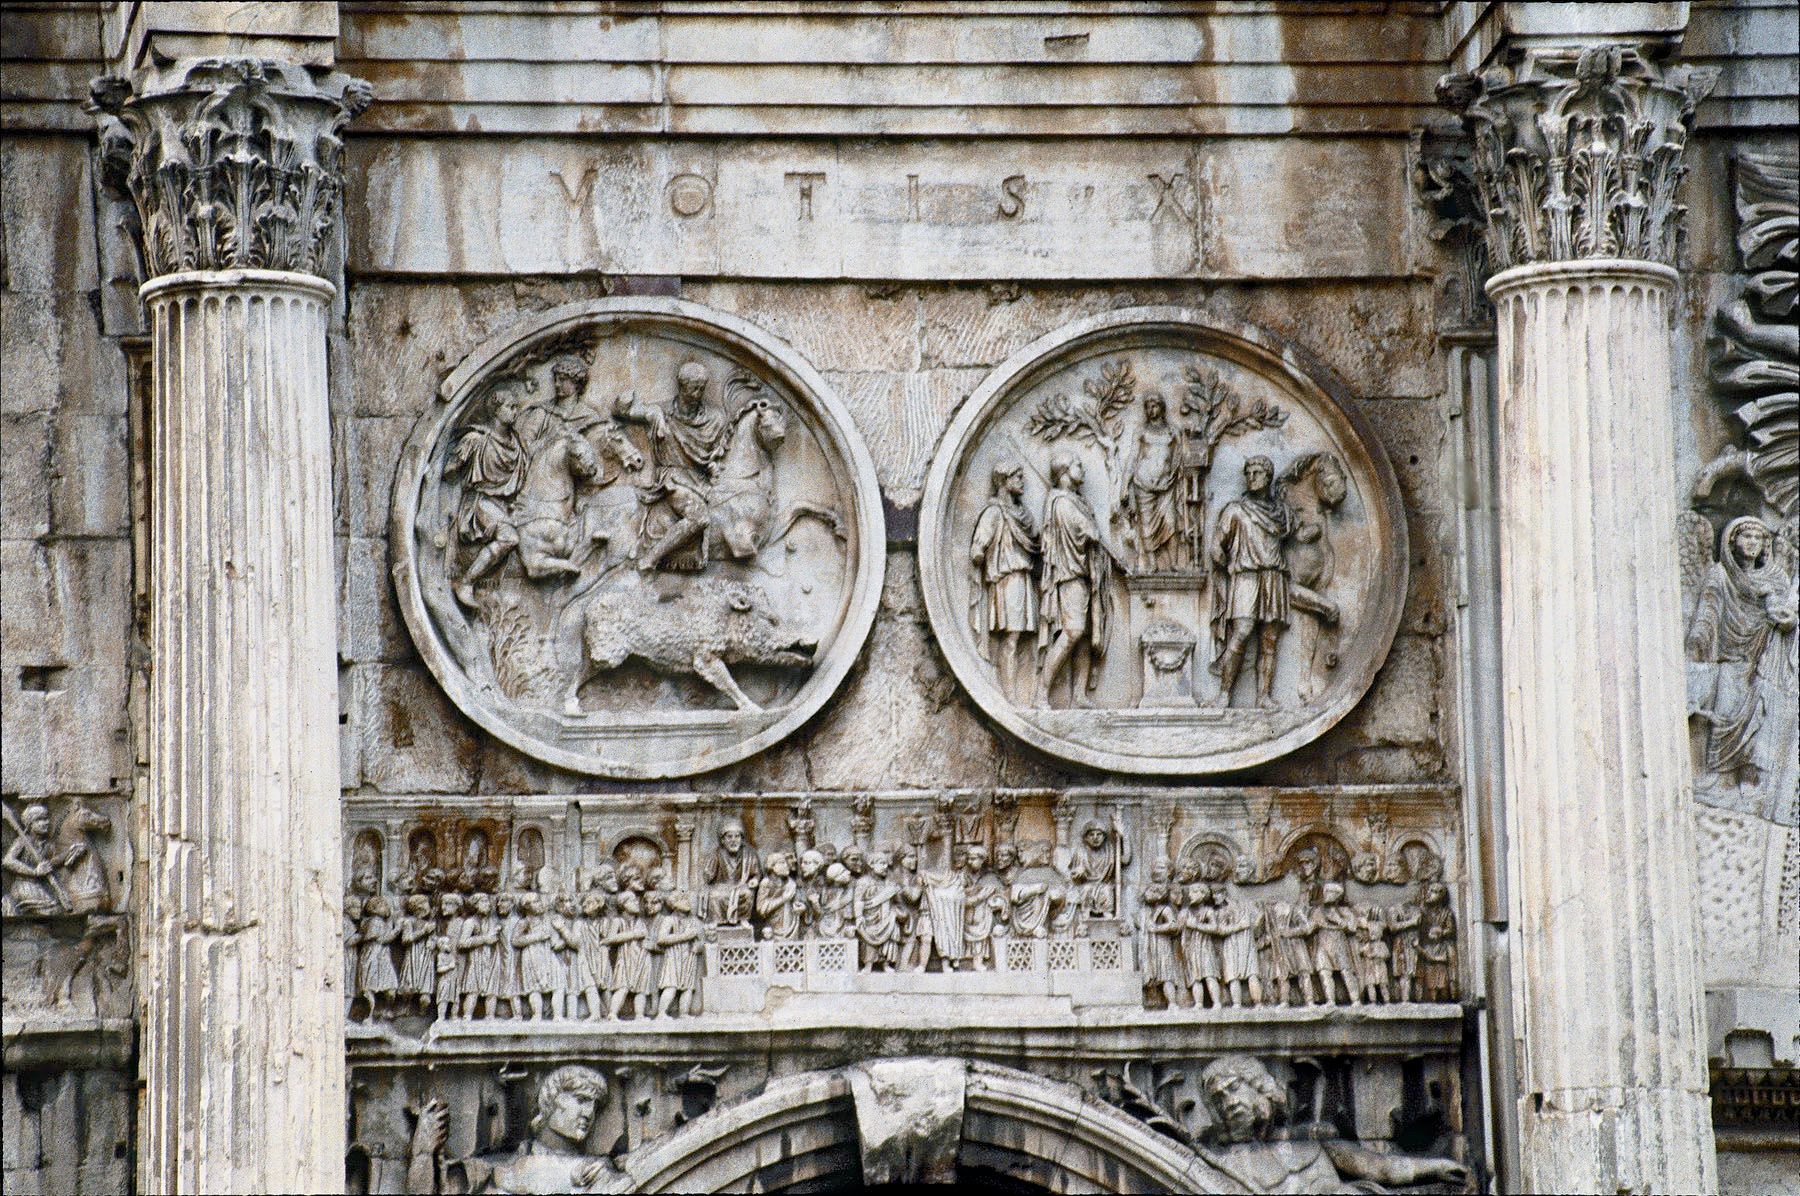 Northside of Constantinian relief from Arch of Constantine (312-15 CE), Rome.